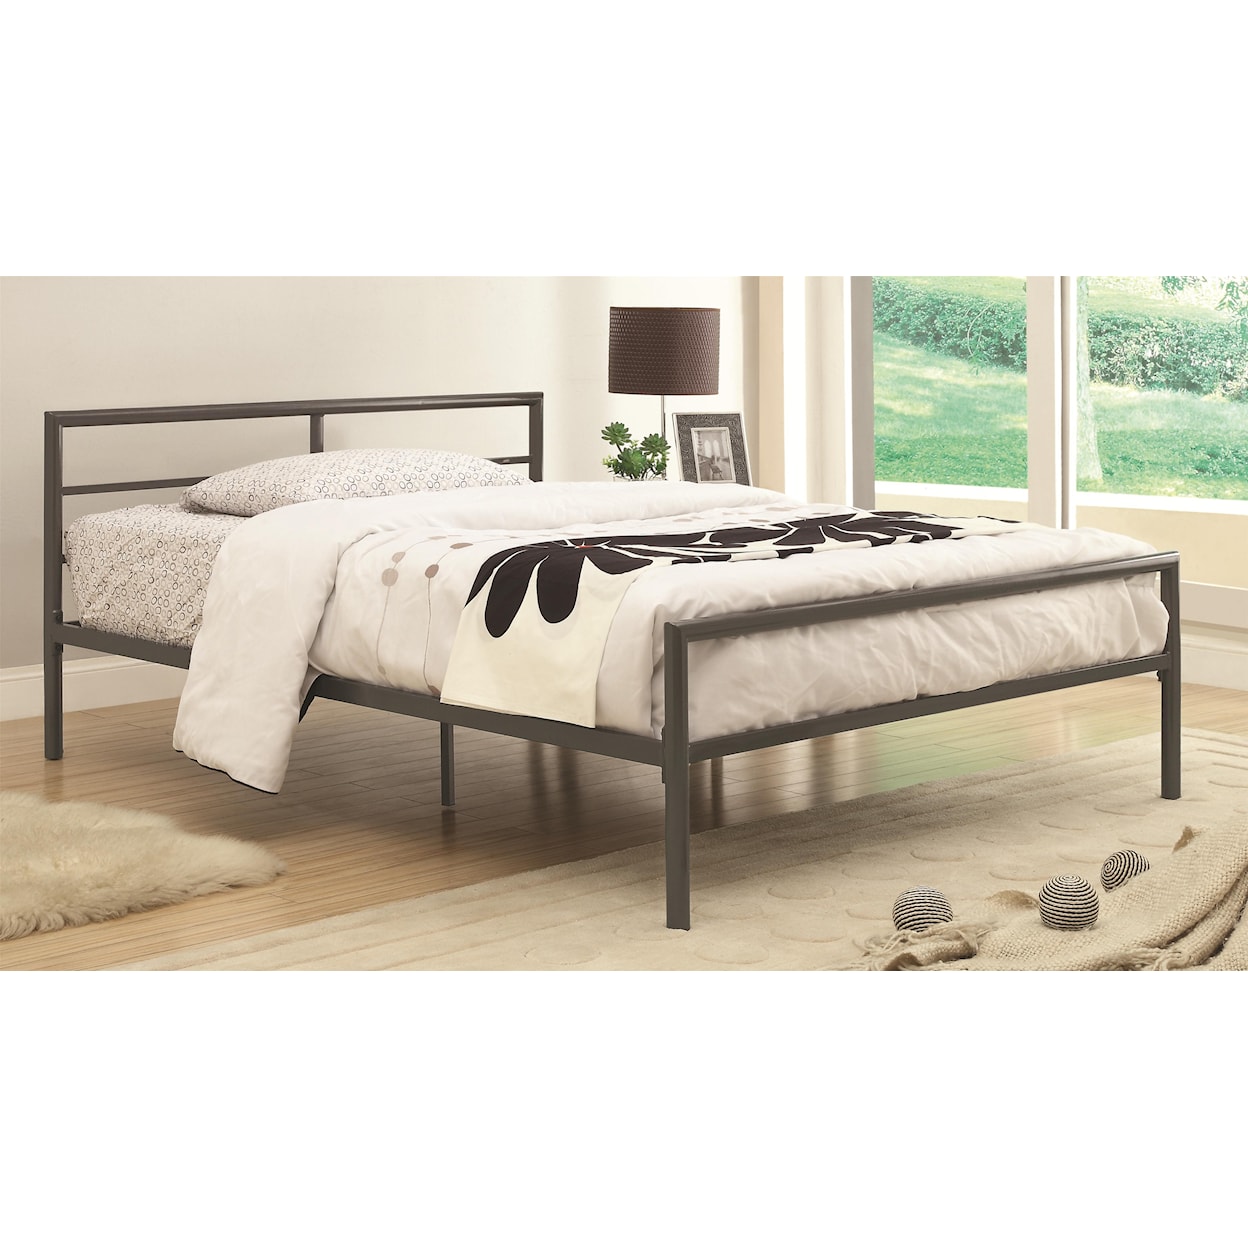 Coaster Iron Beds and Headboards FISHER GUNMETAL TWIN BED |